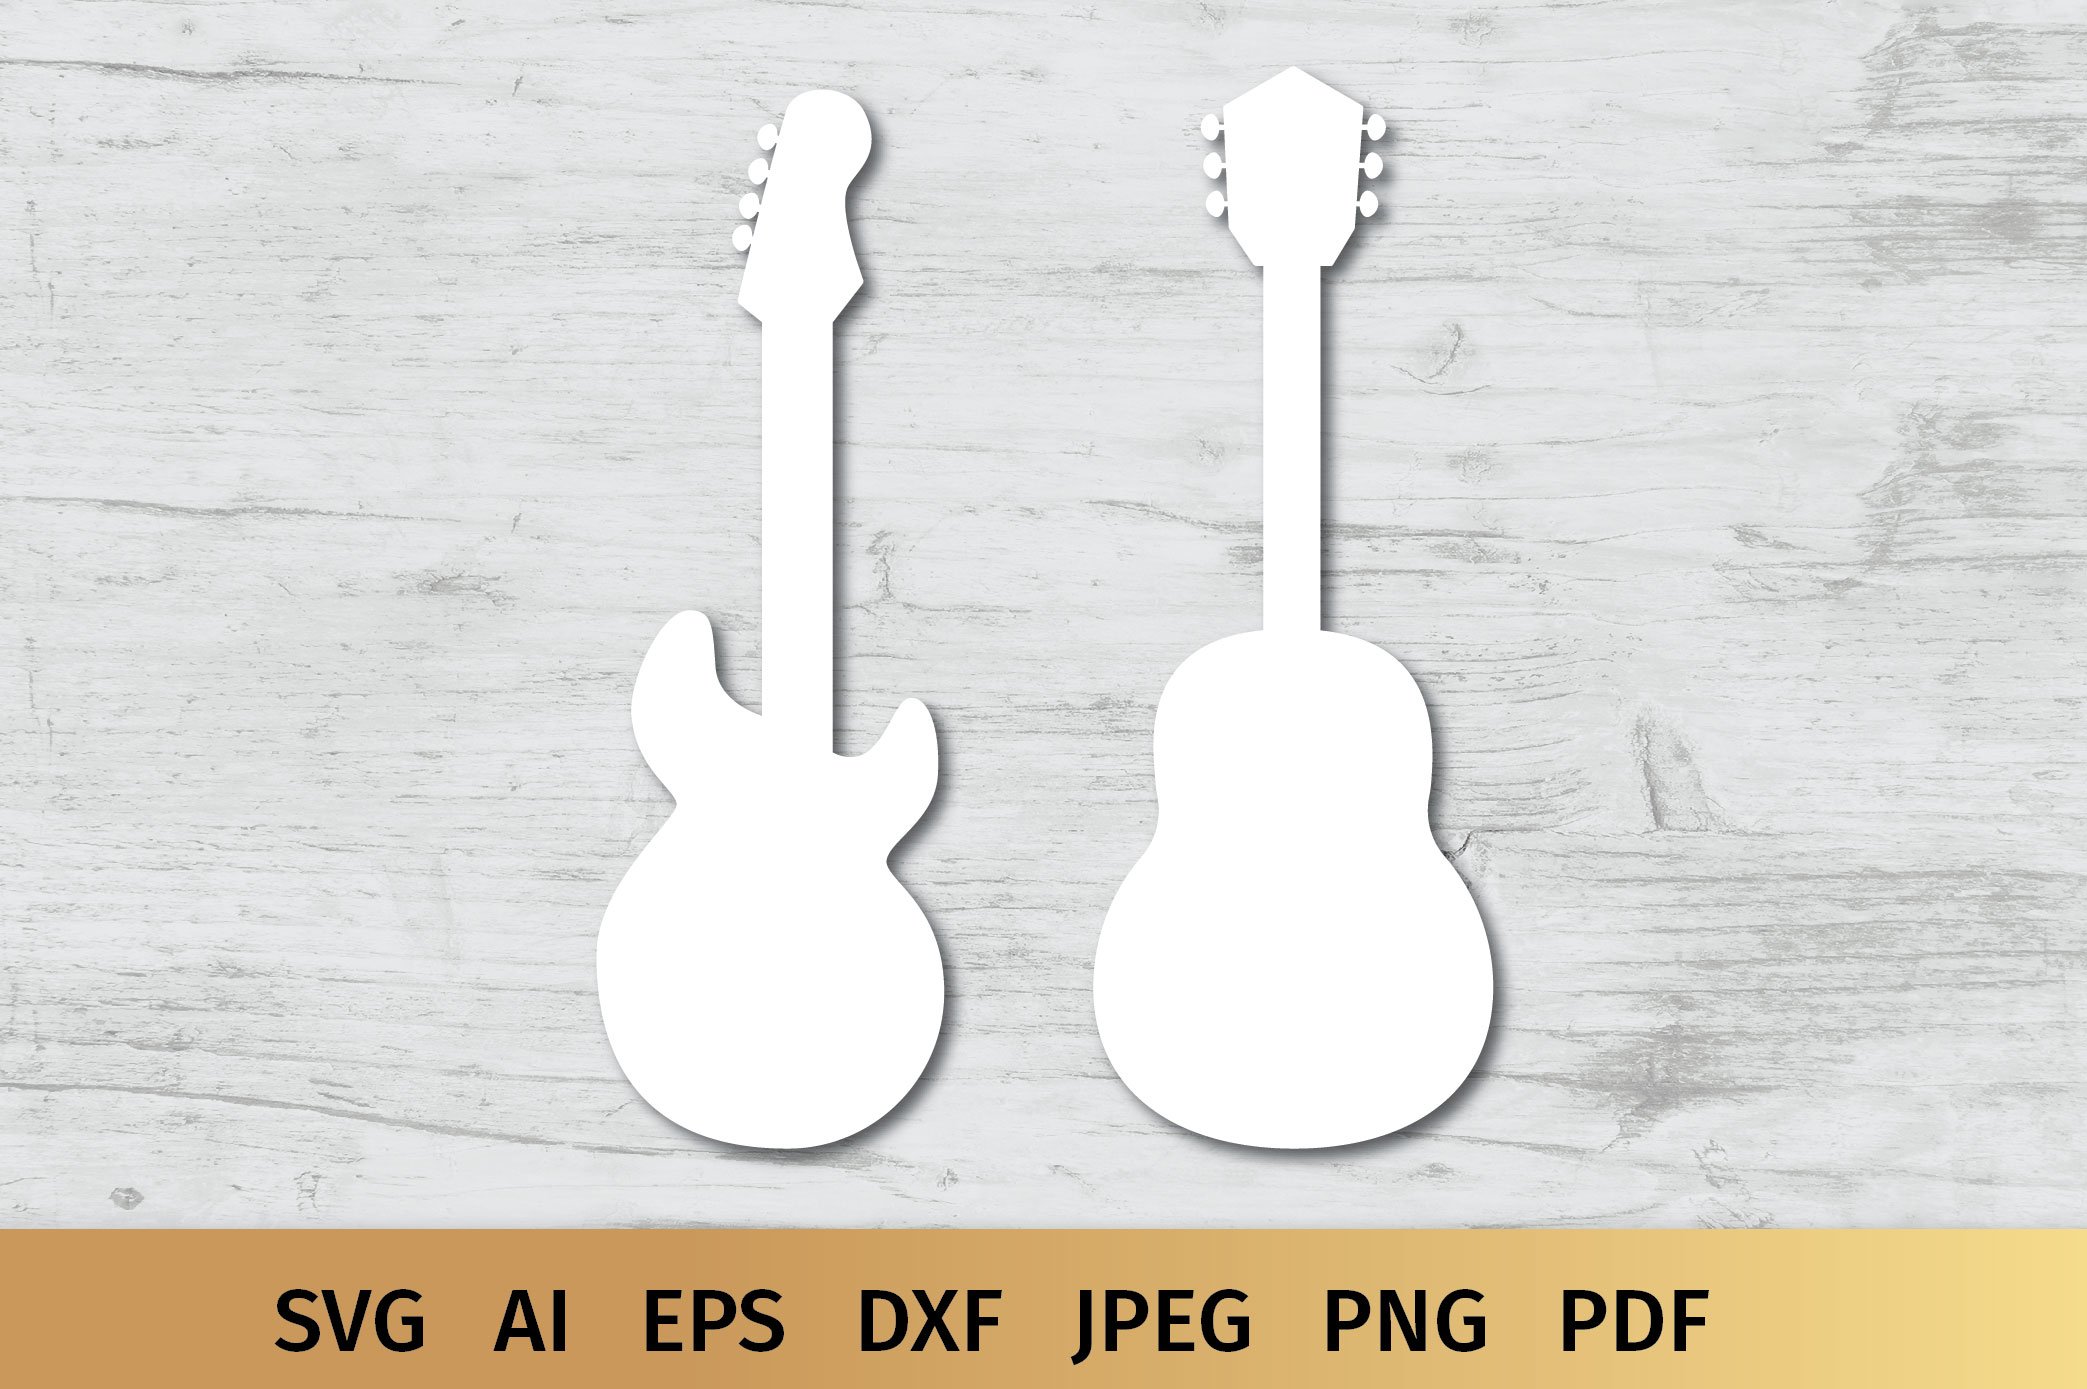 White figures of guitars with formats of use.